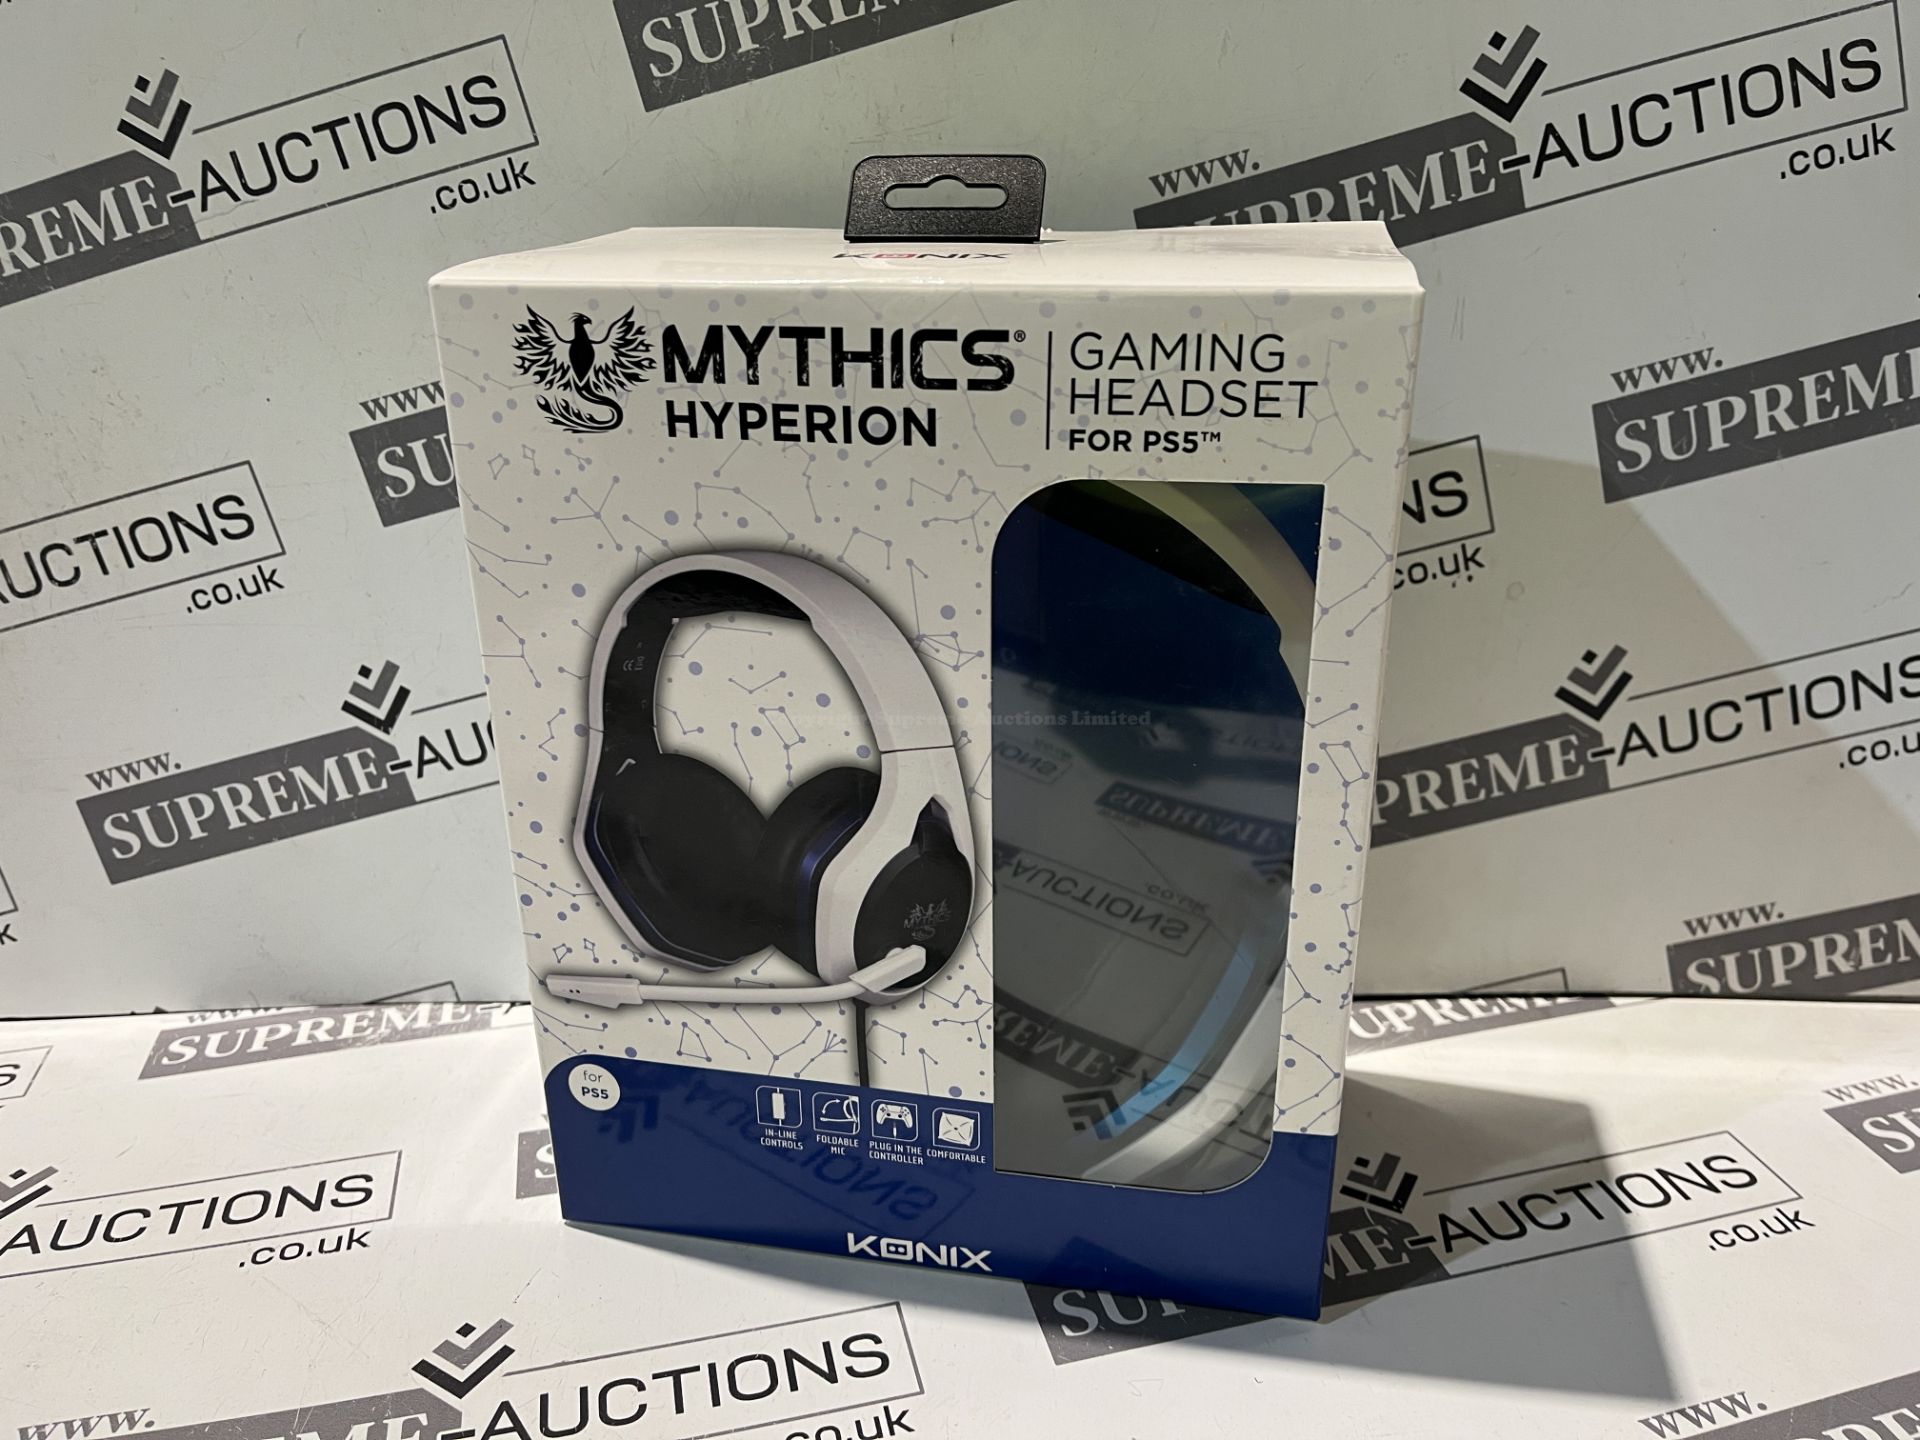 4 X BRAND NEW KONIX MYTHICS HYPERION GAMING HEADSET FOR PS5 R16-5